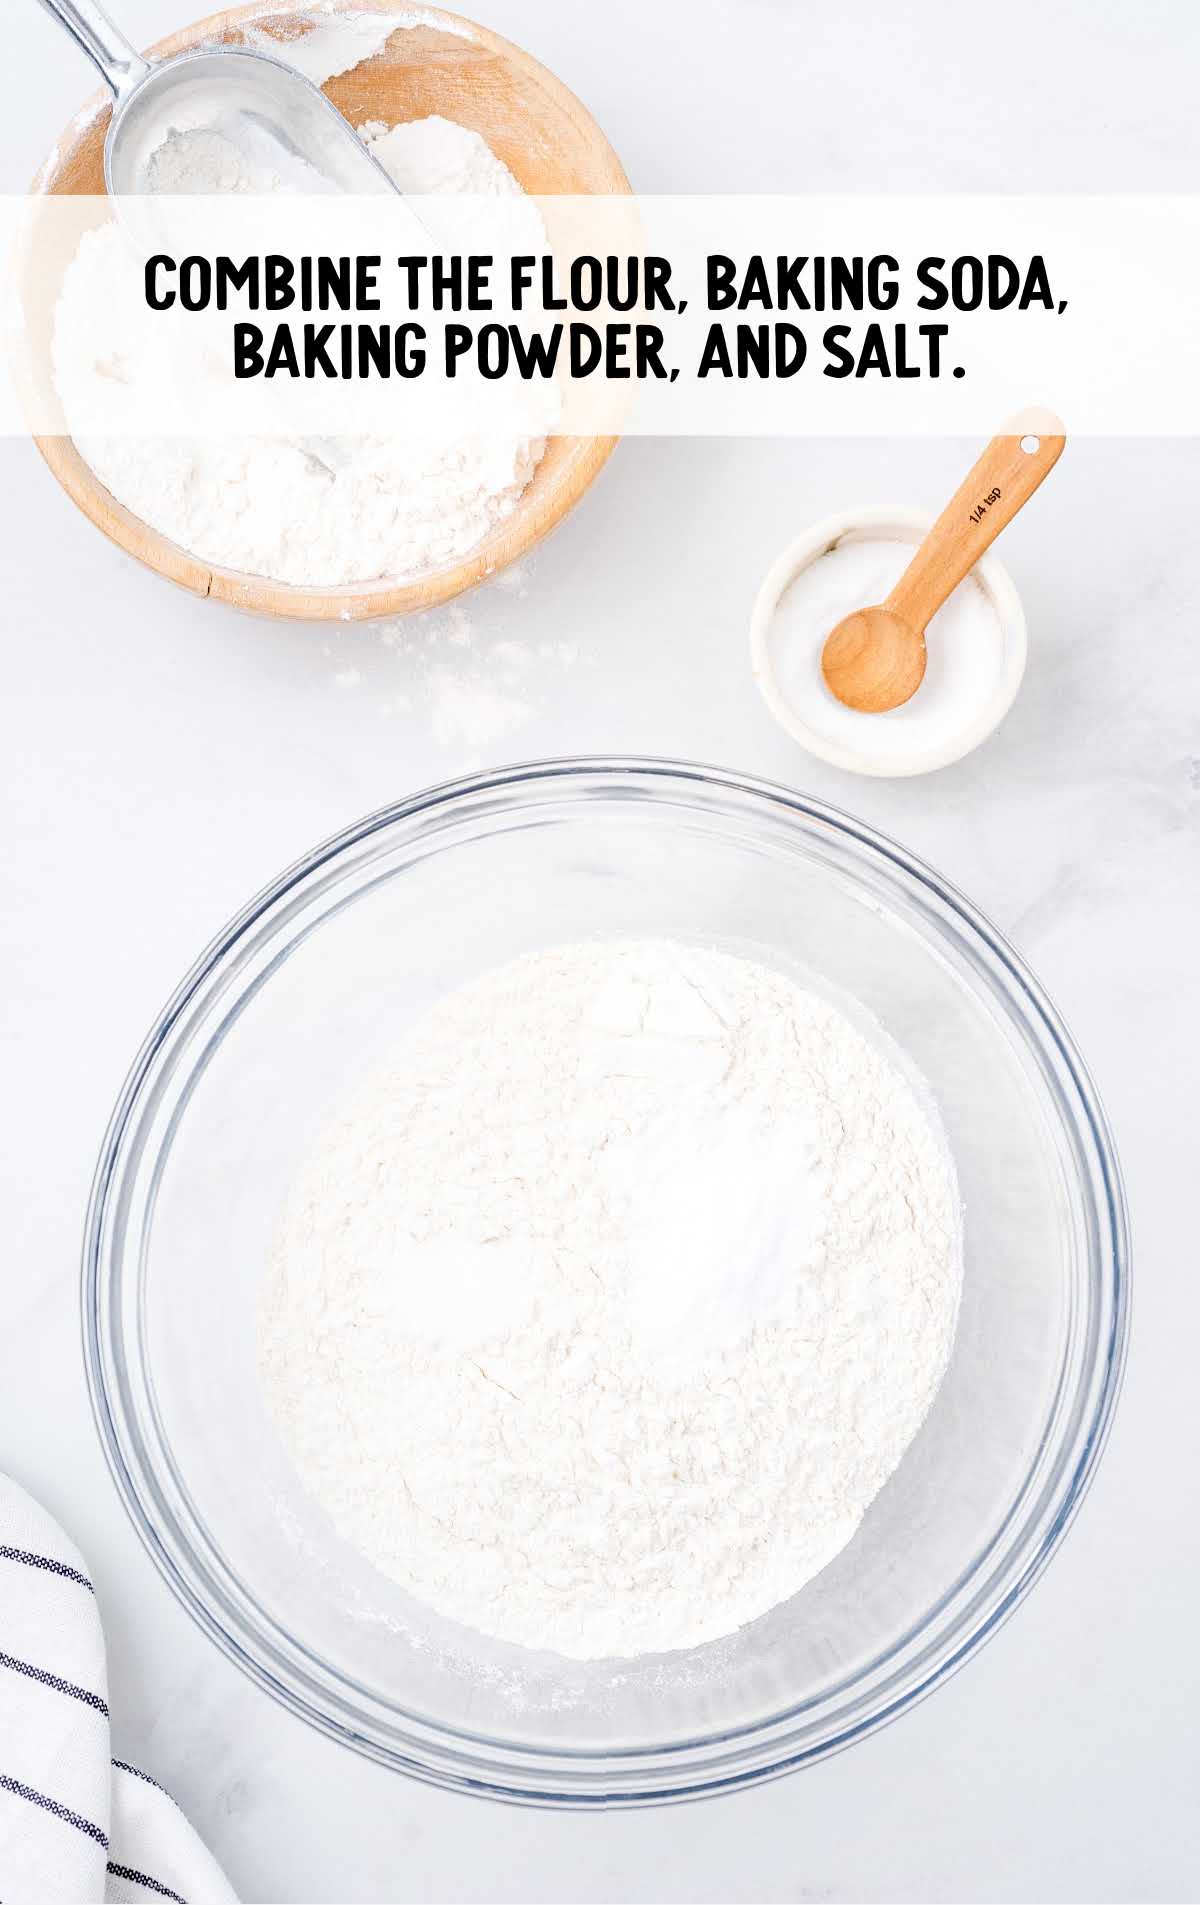 flour, baking soda, baking powder and salt combined in a bowl